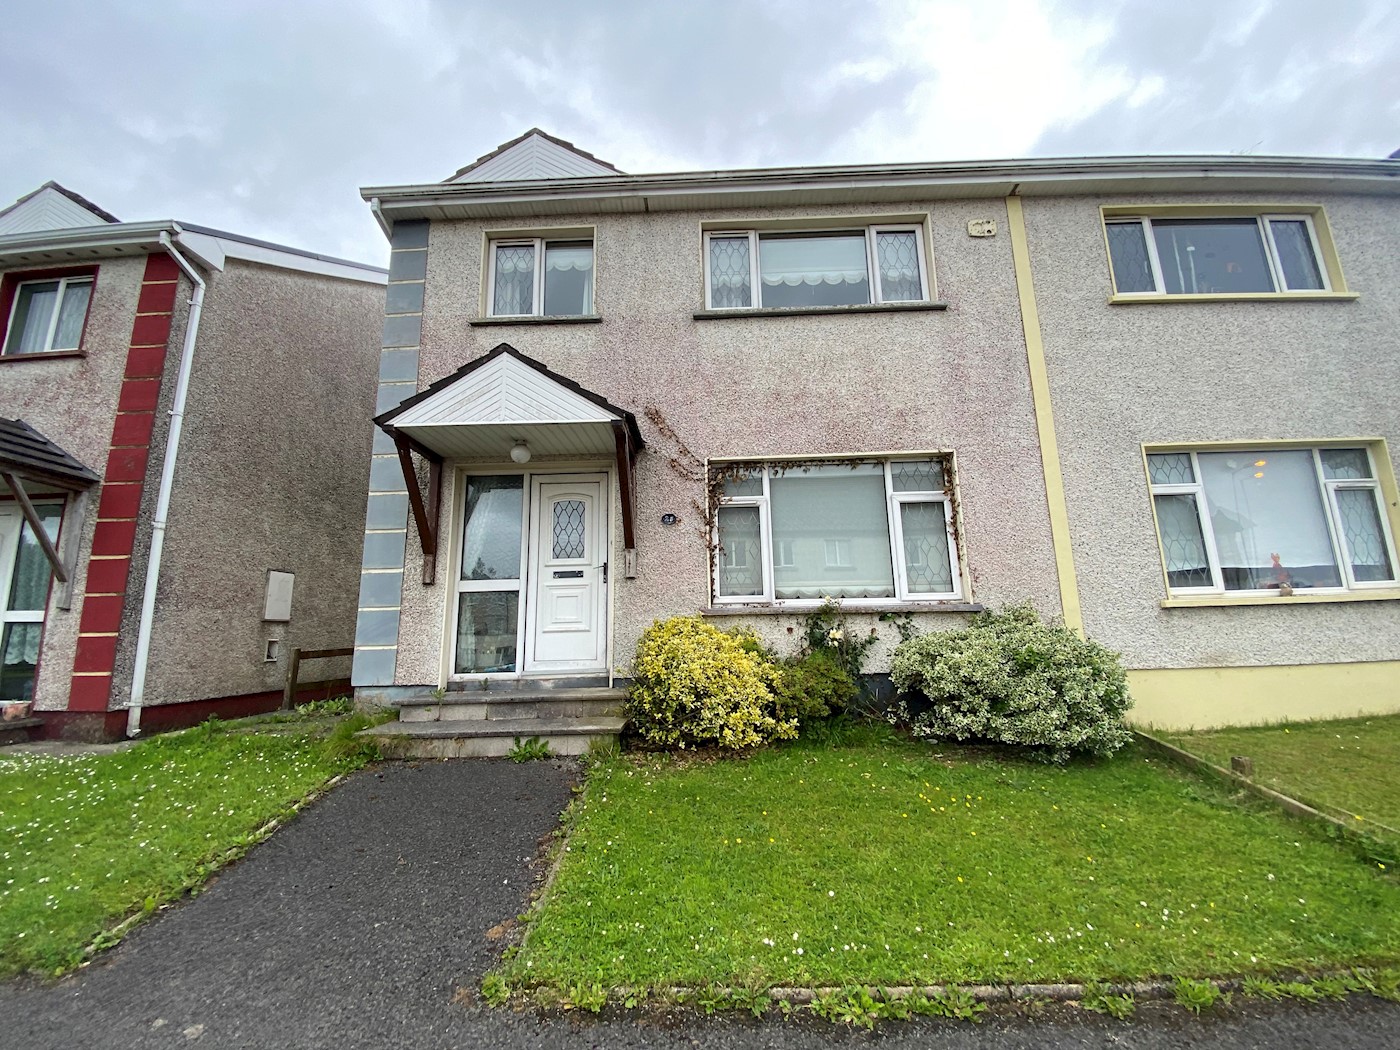 26 Orchard Park, Donegal Town, Co. Donegal, F94 W0H7 1/2